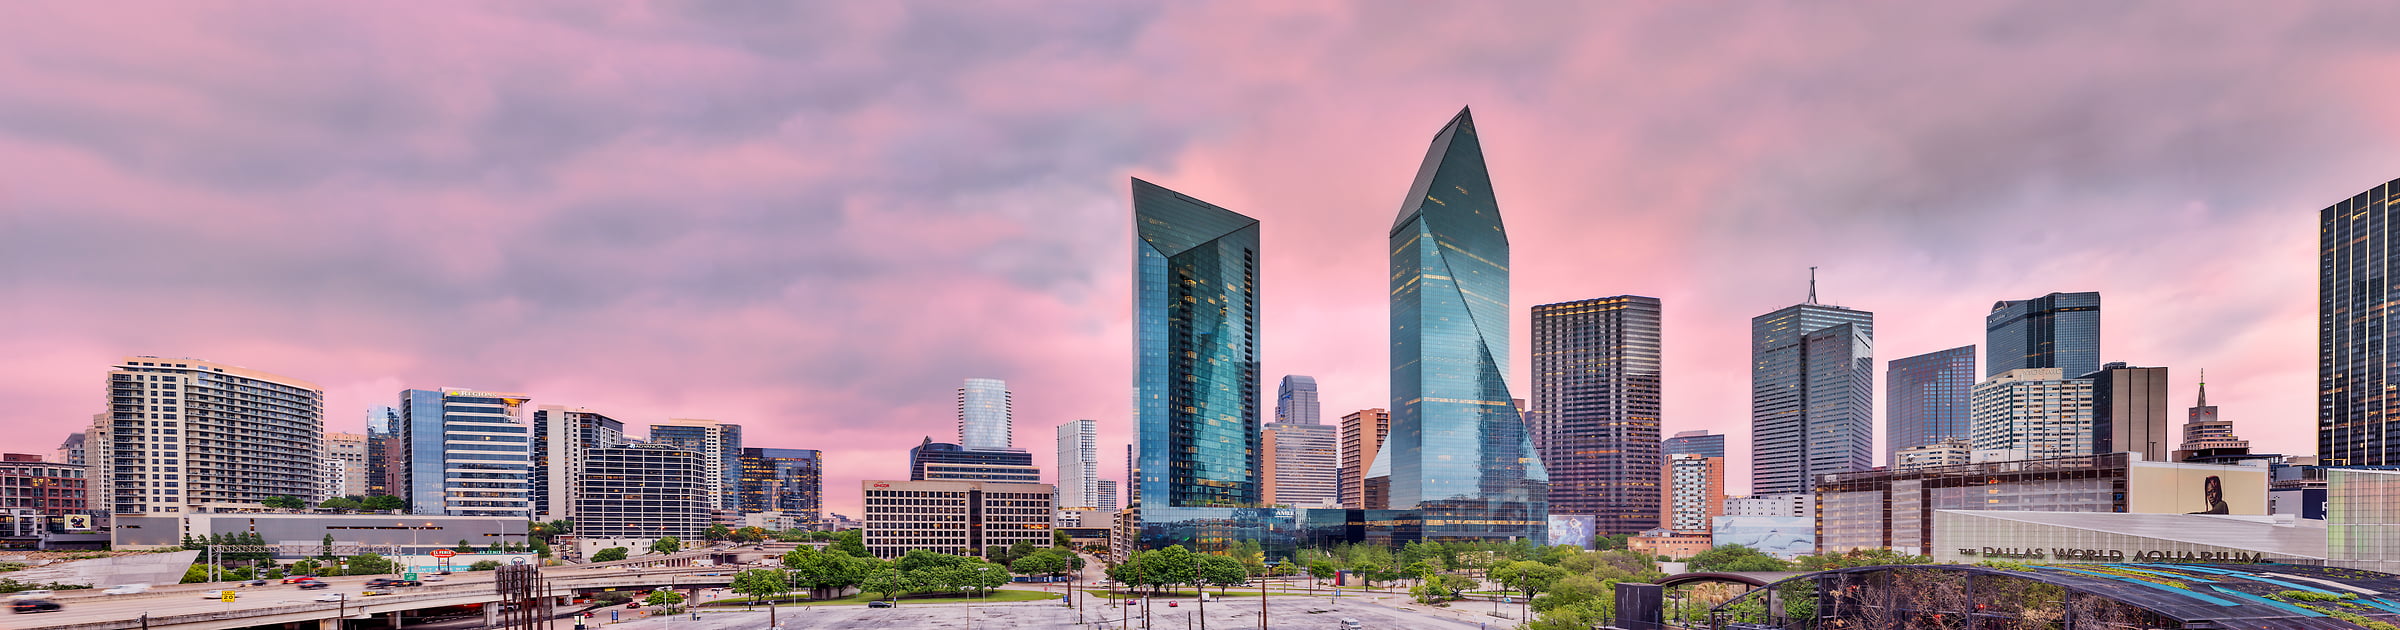 3,107 megapixels! A very high resolution, large-format VAST photo print of the Dallas skyline at sunset; cityscape photograph created by Chris Blake in Dallas, TX.